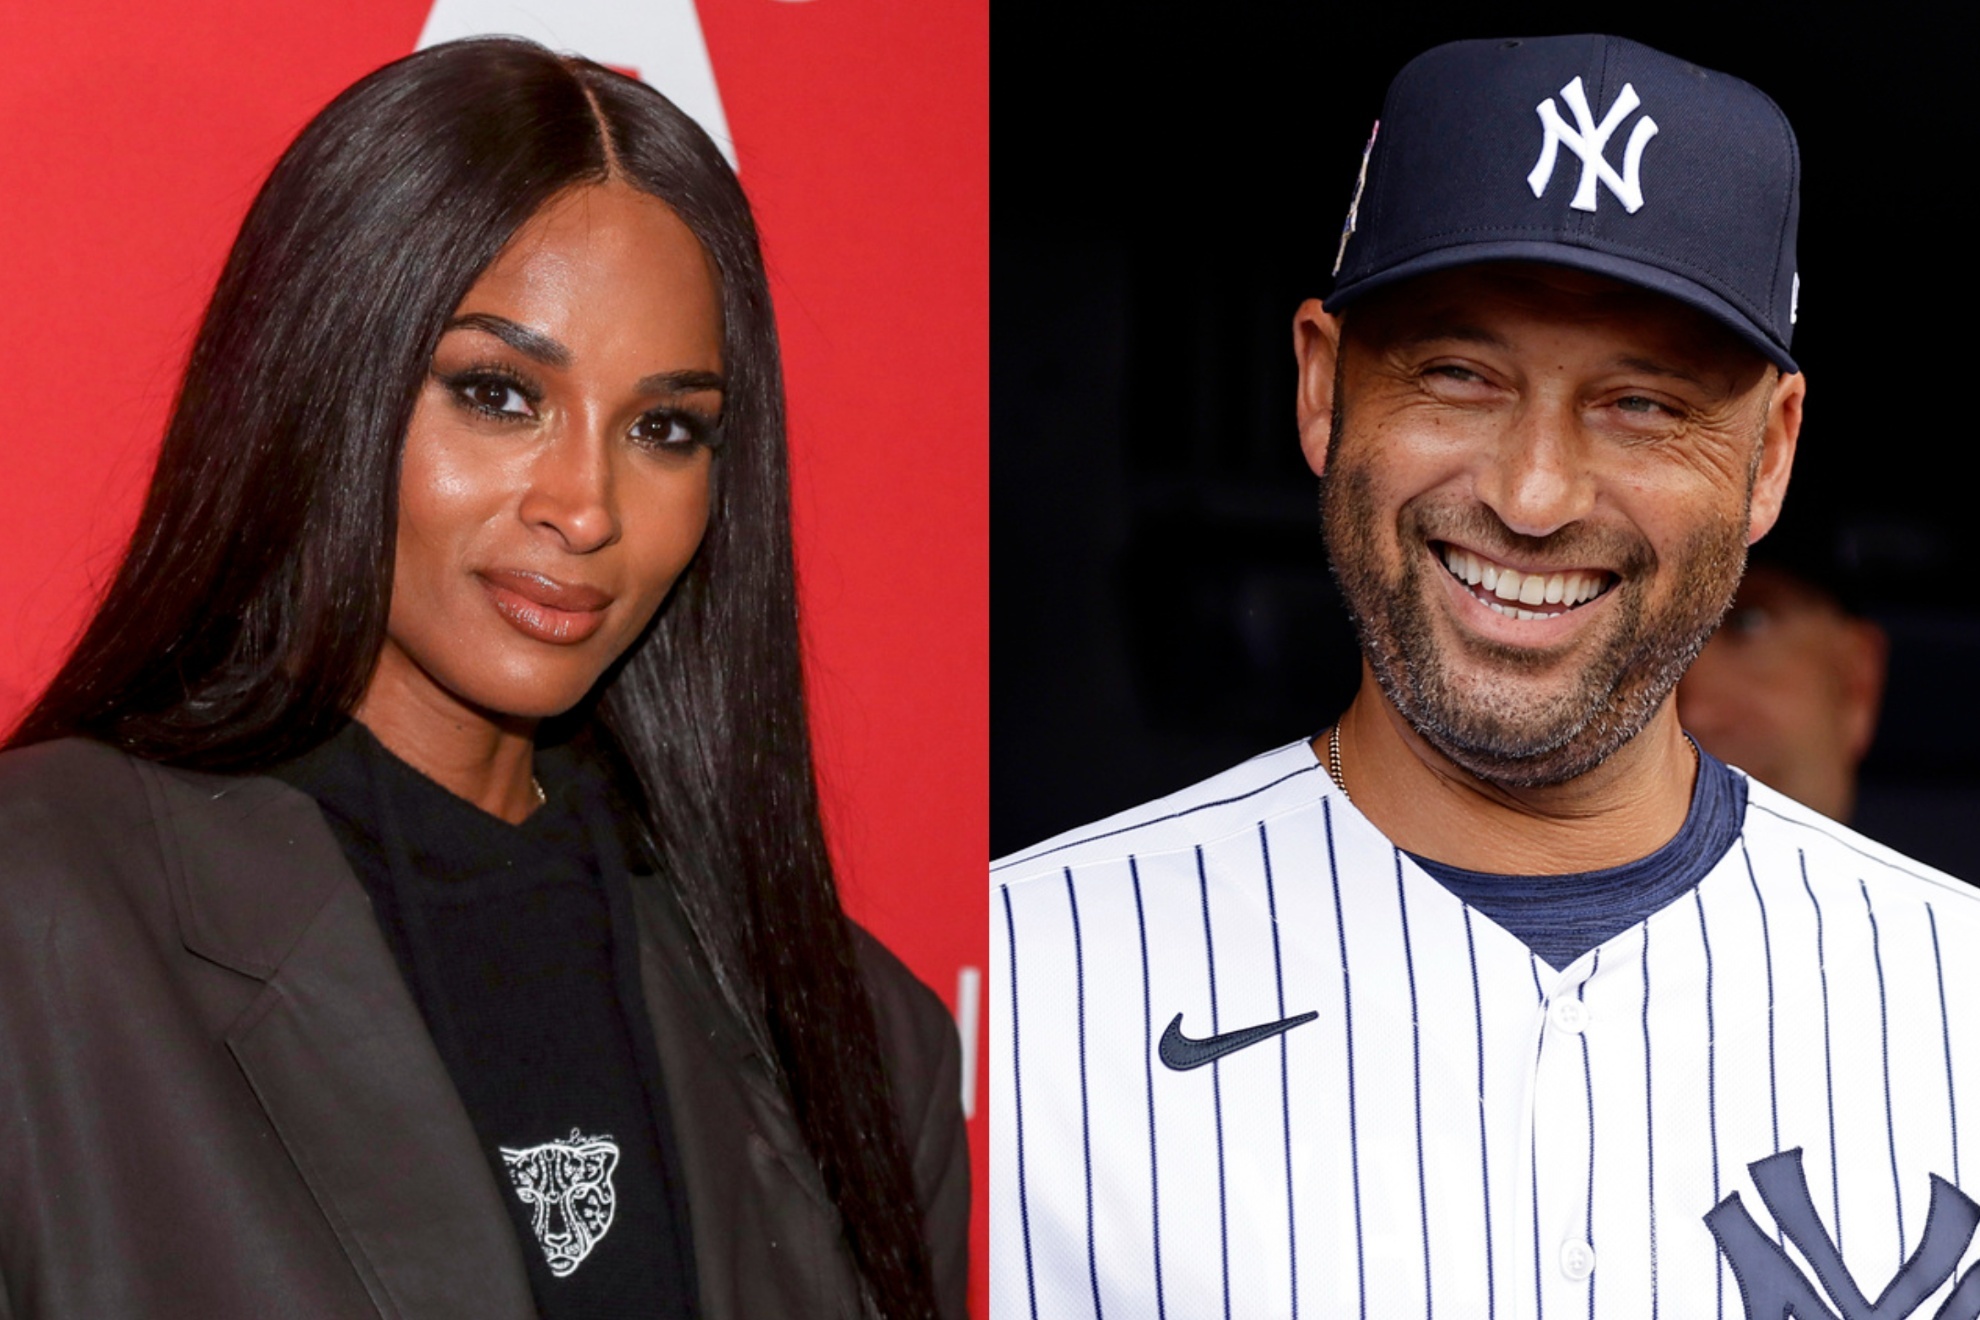 Singer Ciara recently found out she is related to NY Yankees legend Derek Jeter